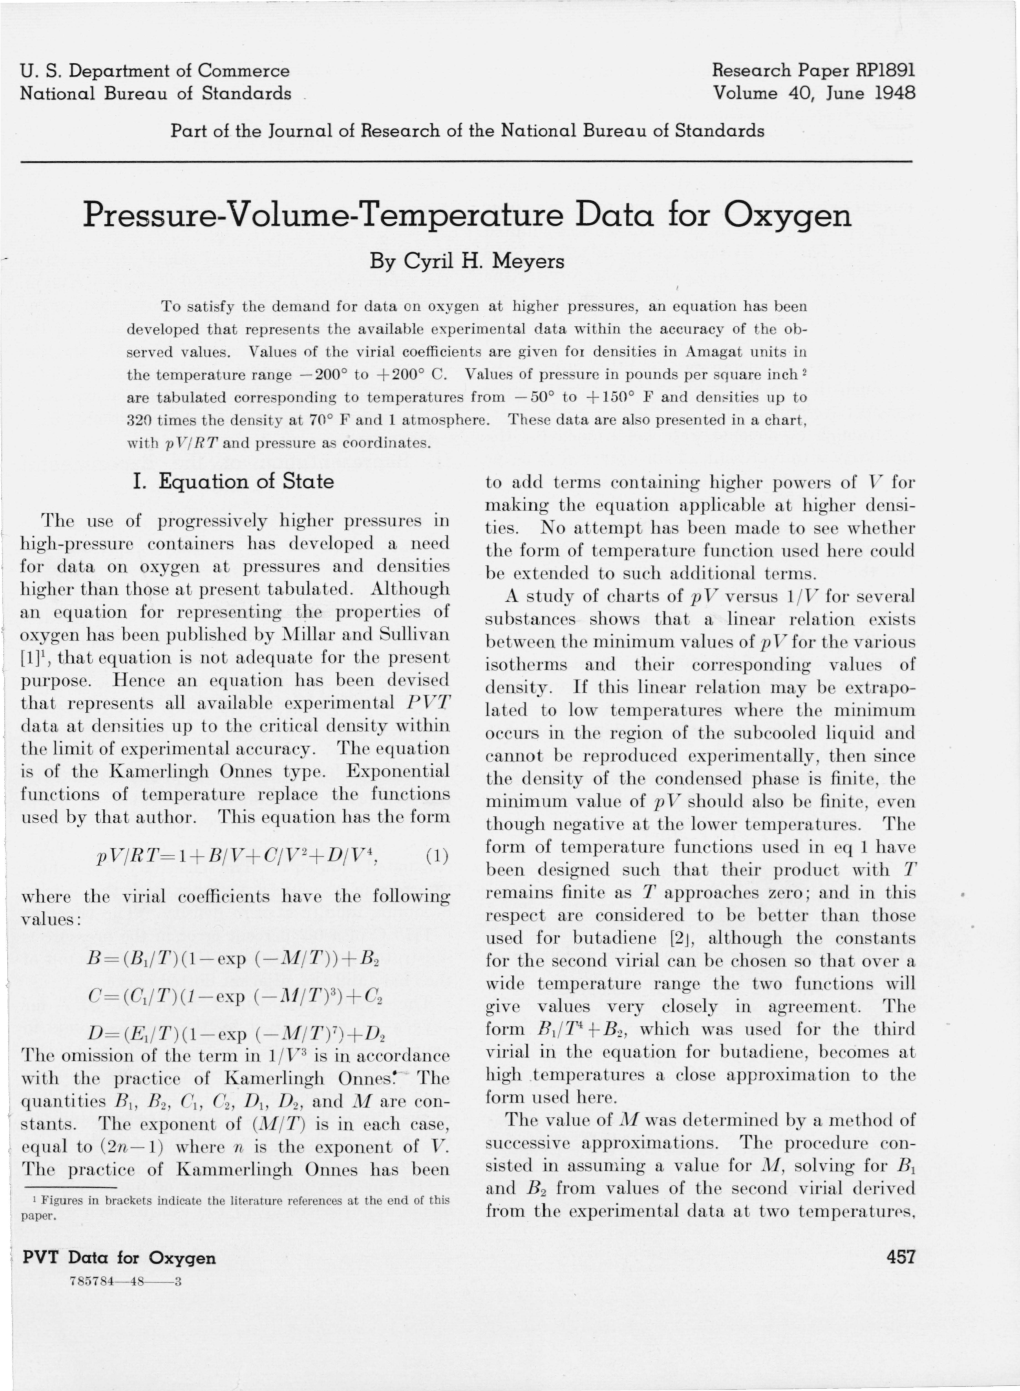 Pressure-Volume-Temperature Data for Oxygen by Cyril H